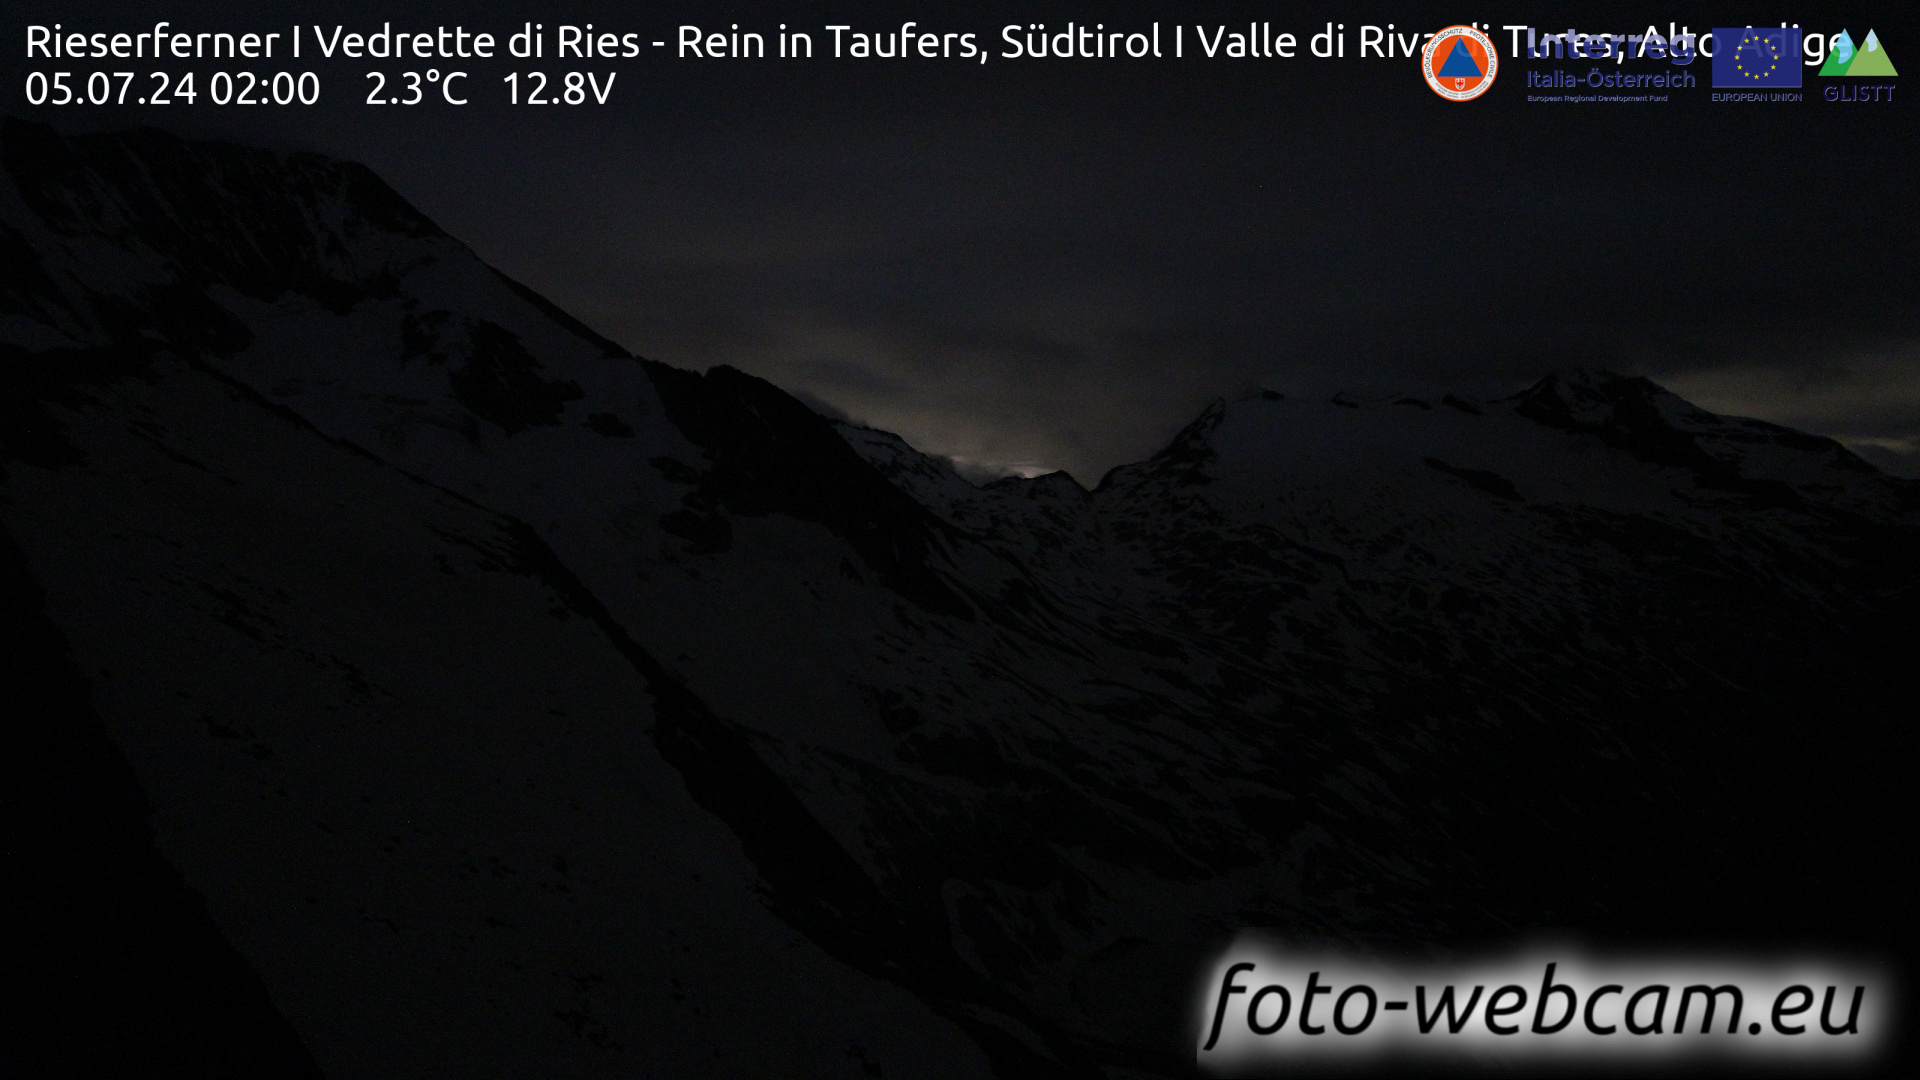 Rein in Taufers Do. 02:19